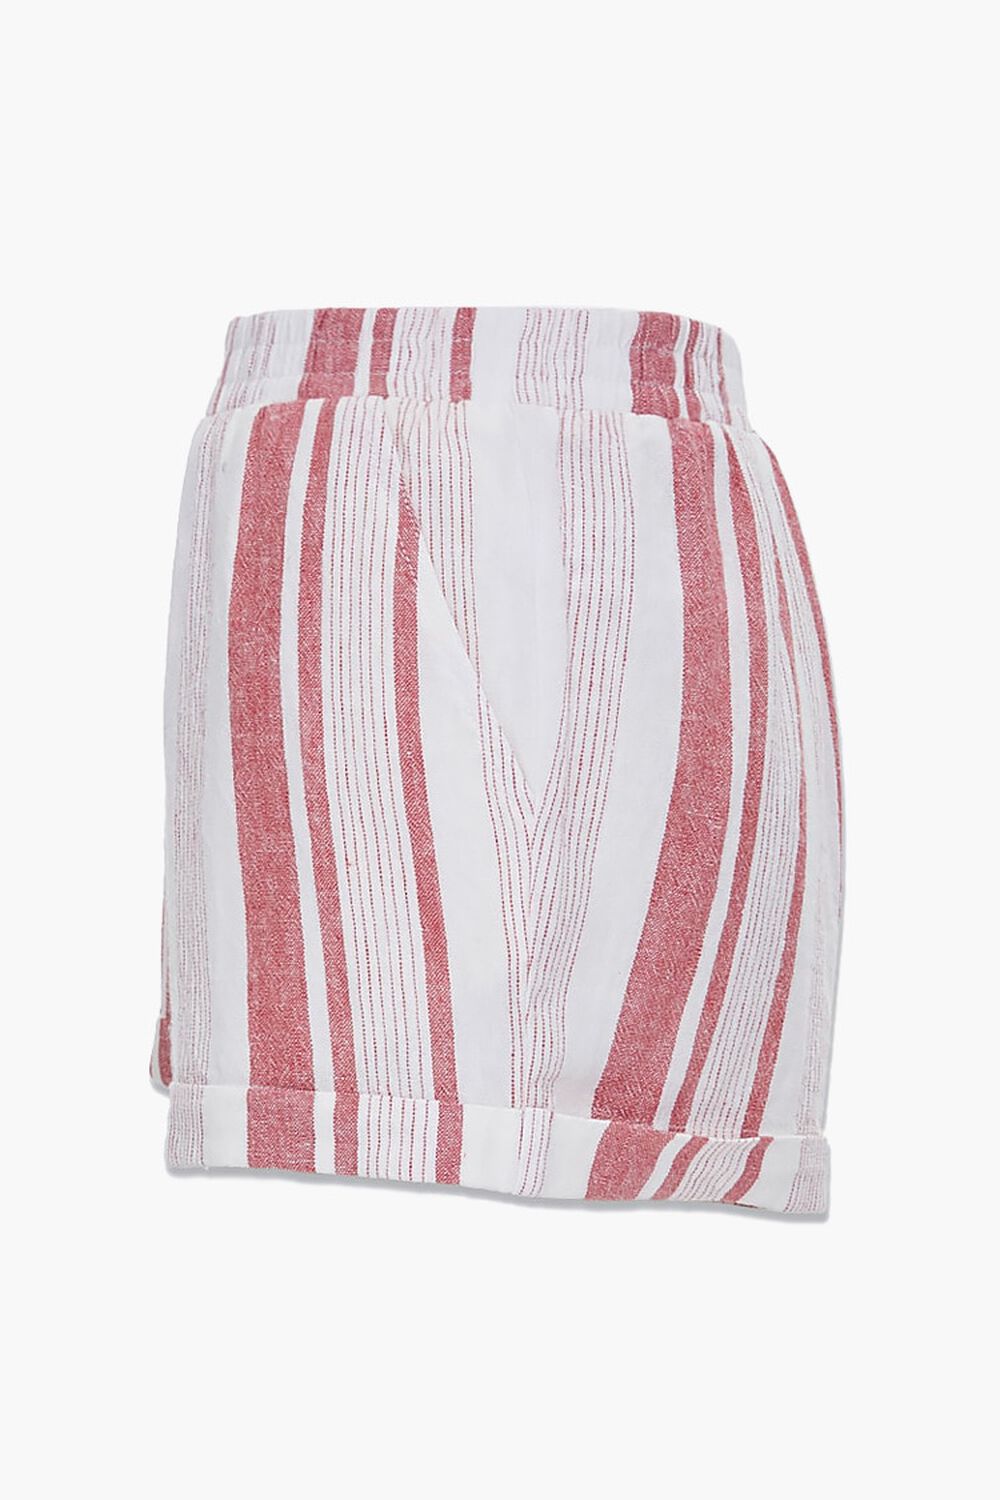 WHITE/RED Striped Linen-Blend Shorts, image 2